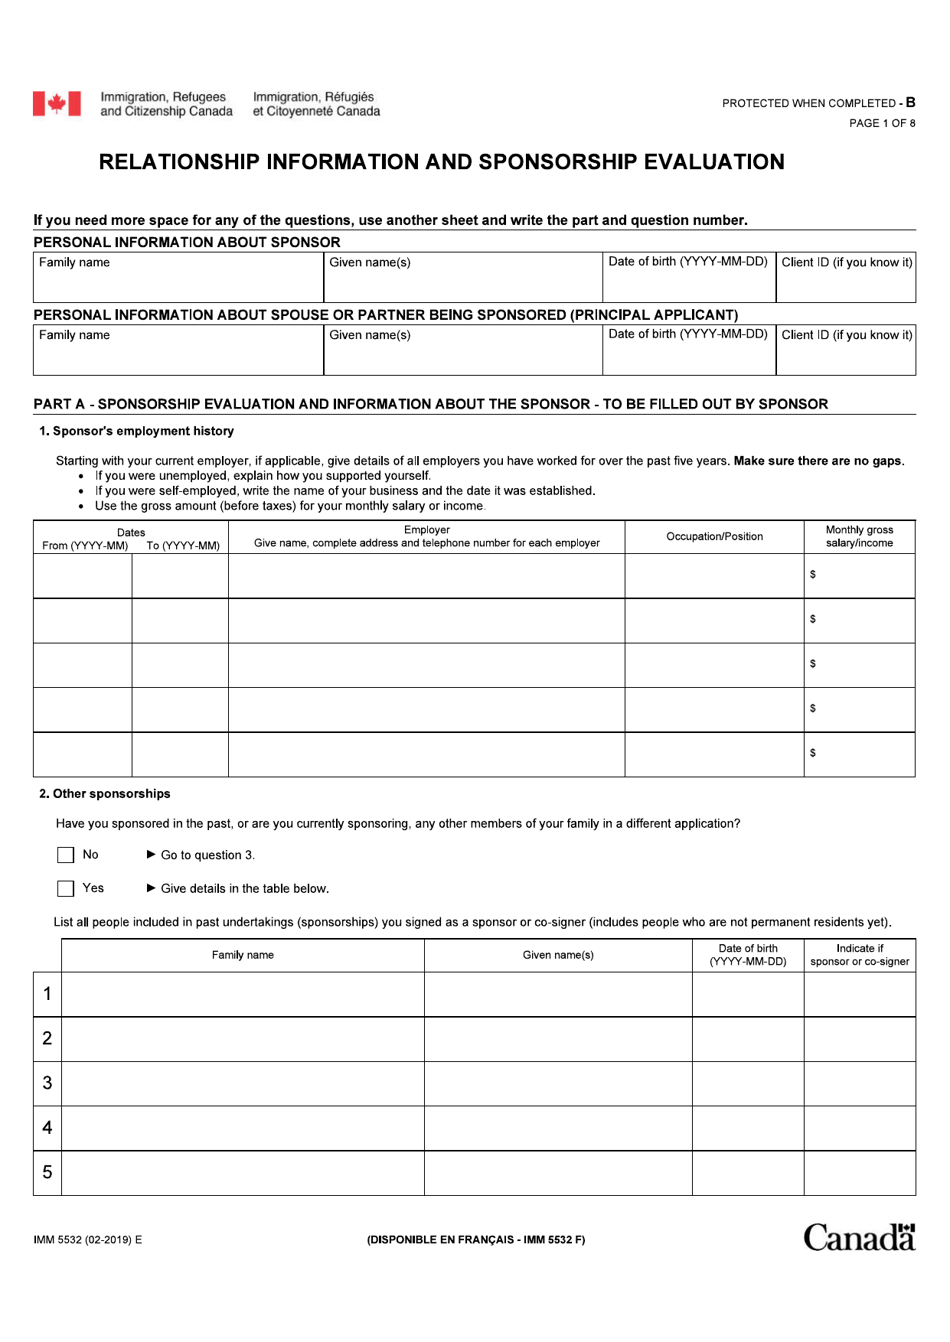 Form IMM5532 Relationship Information and Sponsorship Evaluation - Canada, Page 1